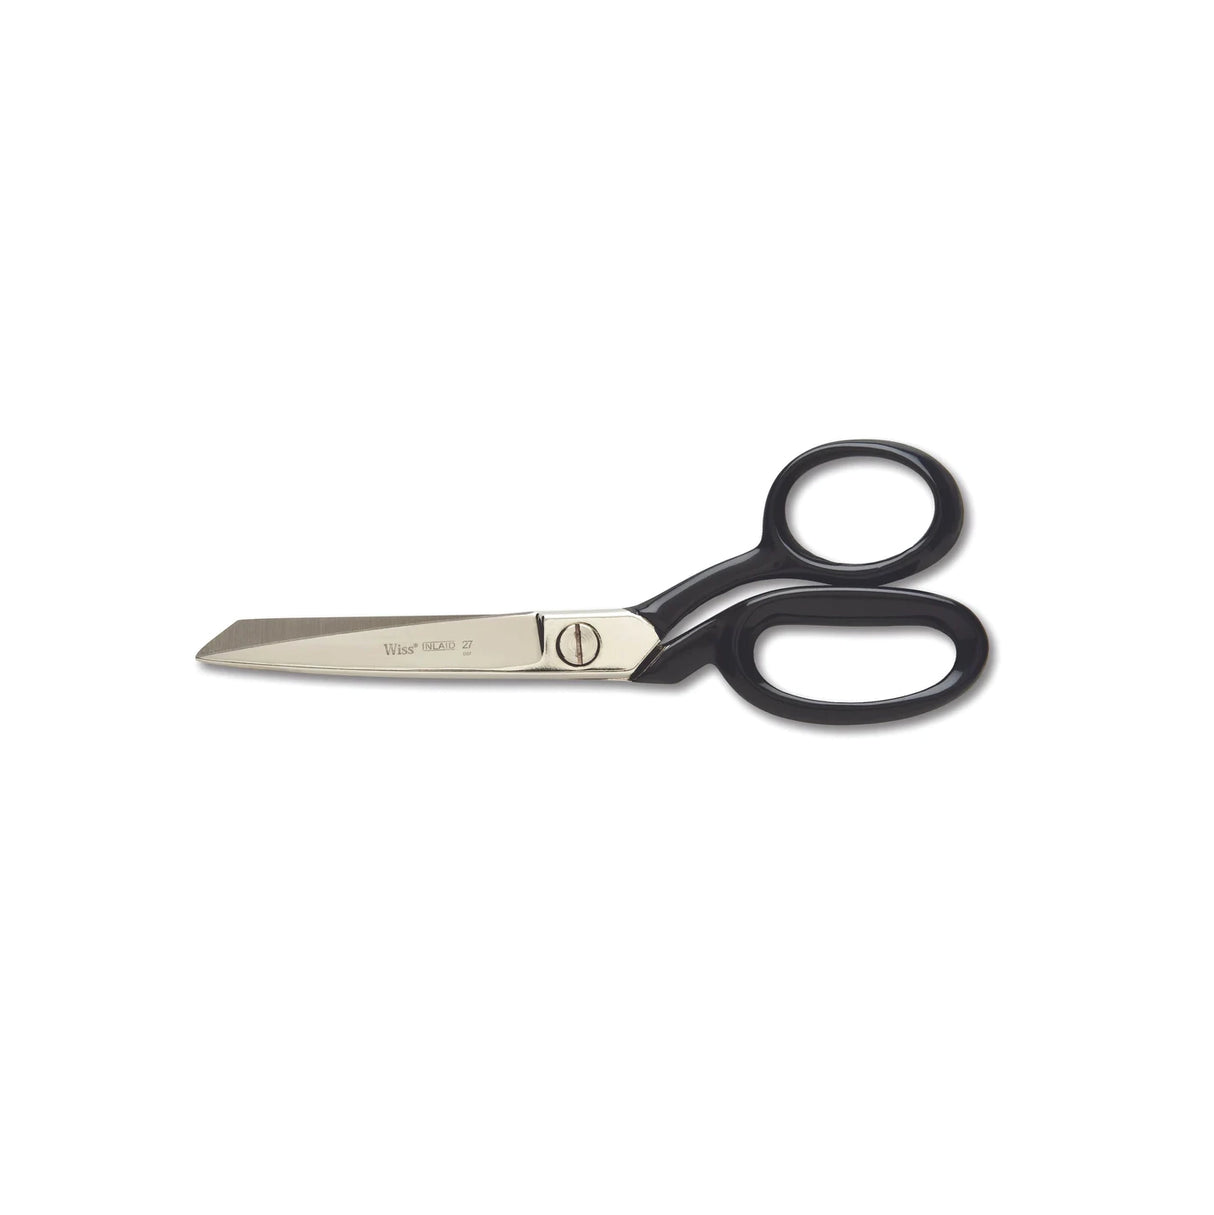 7 1/2", Wiss Solid Steel Bent Trimmer Shears, #T-1287